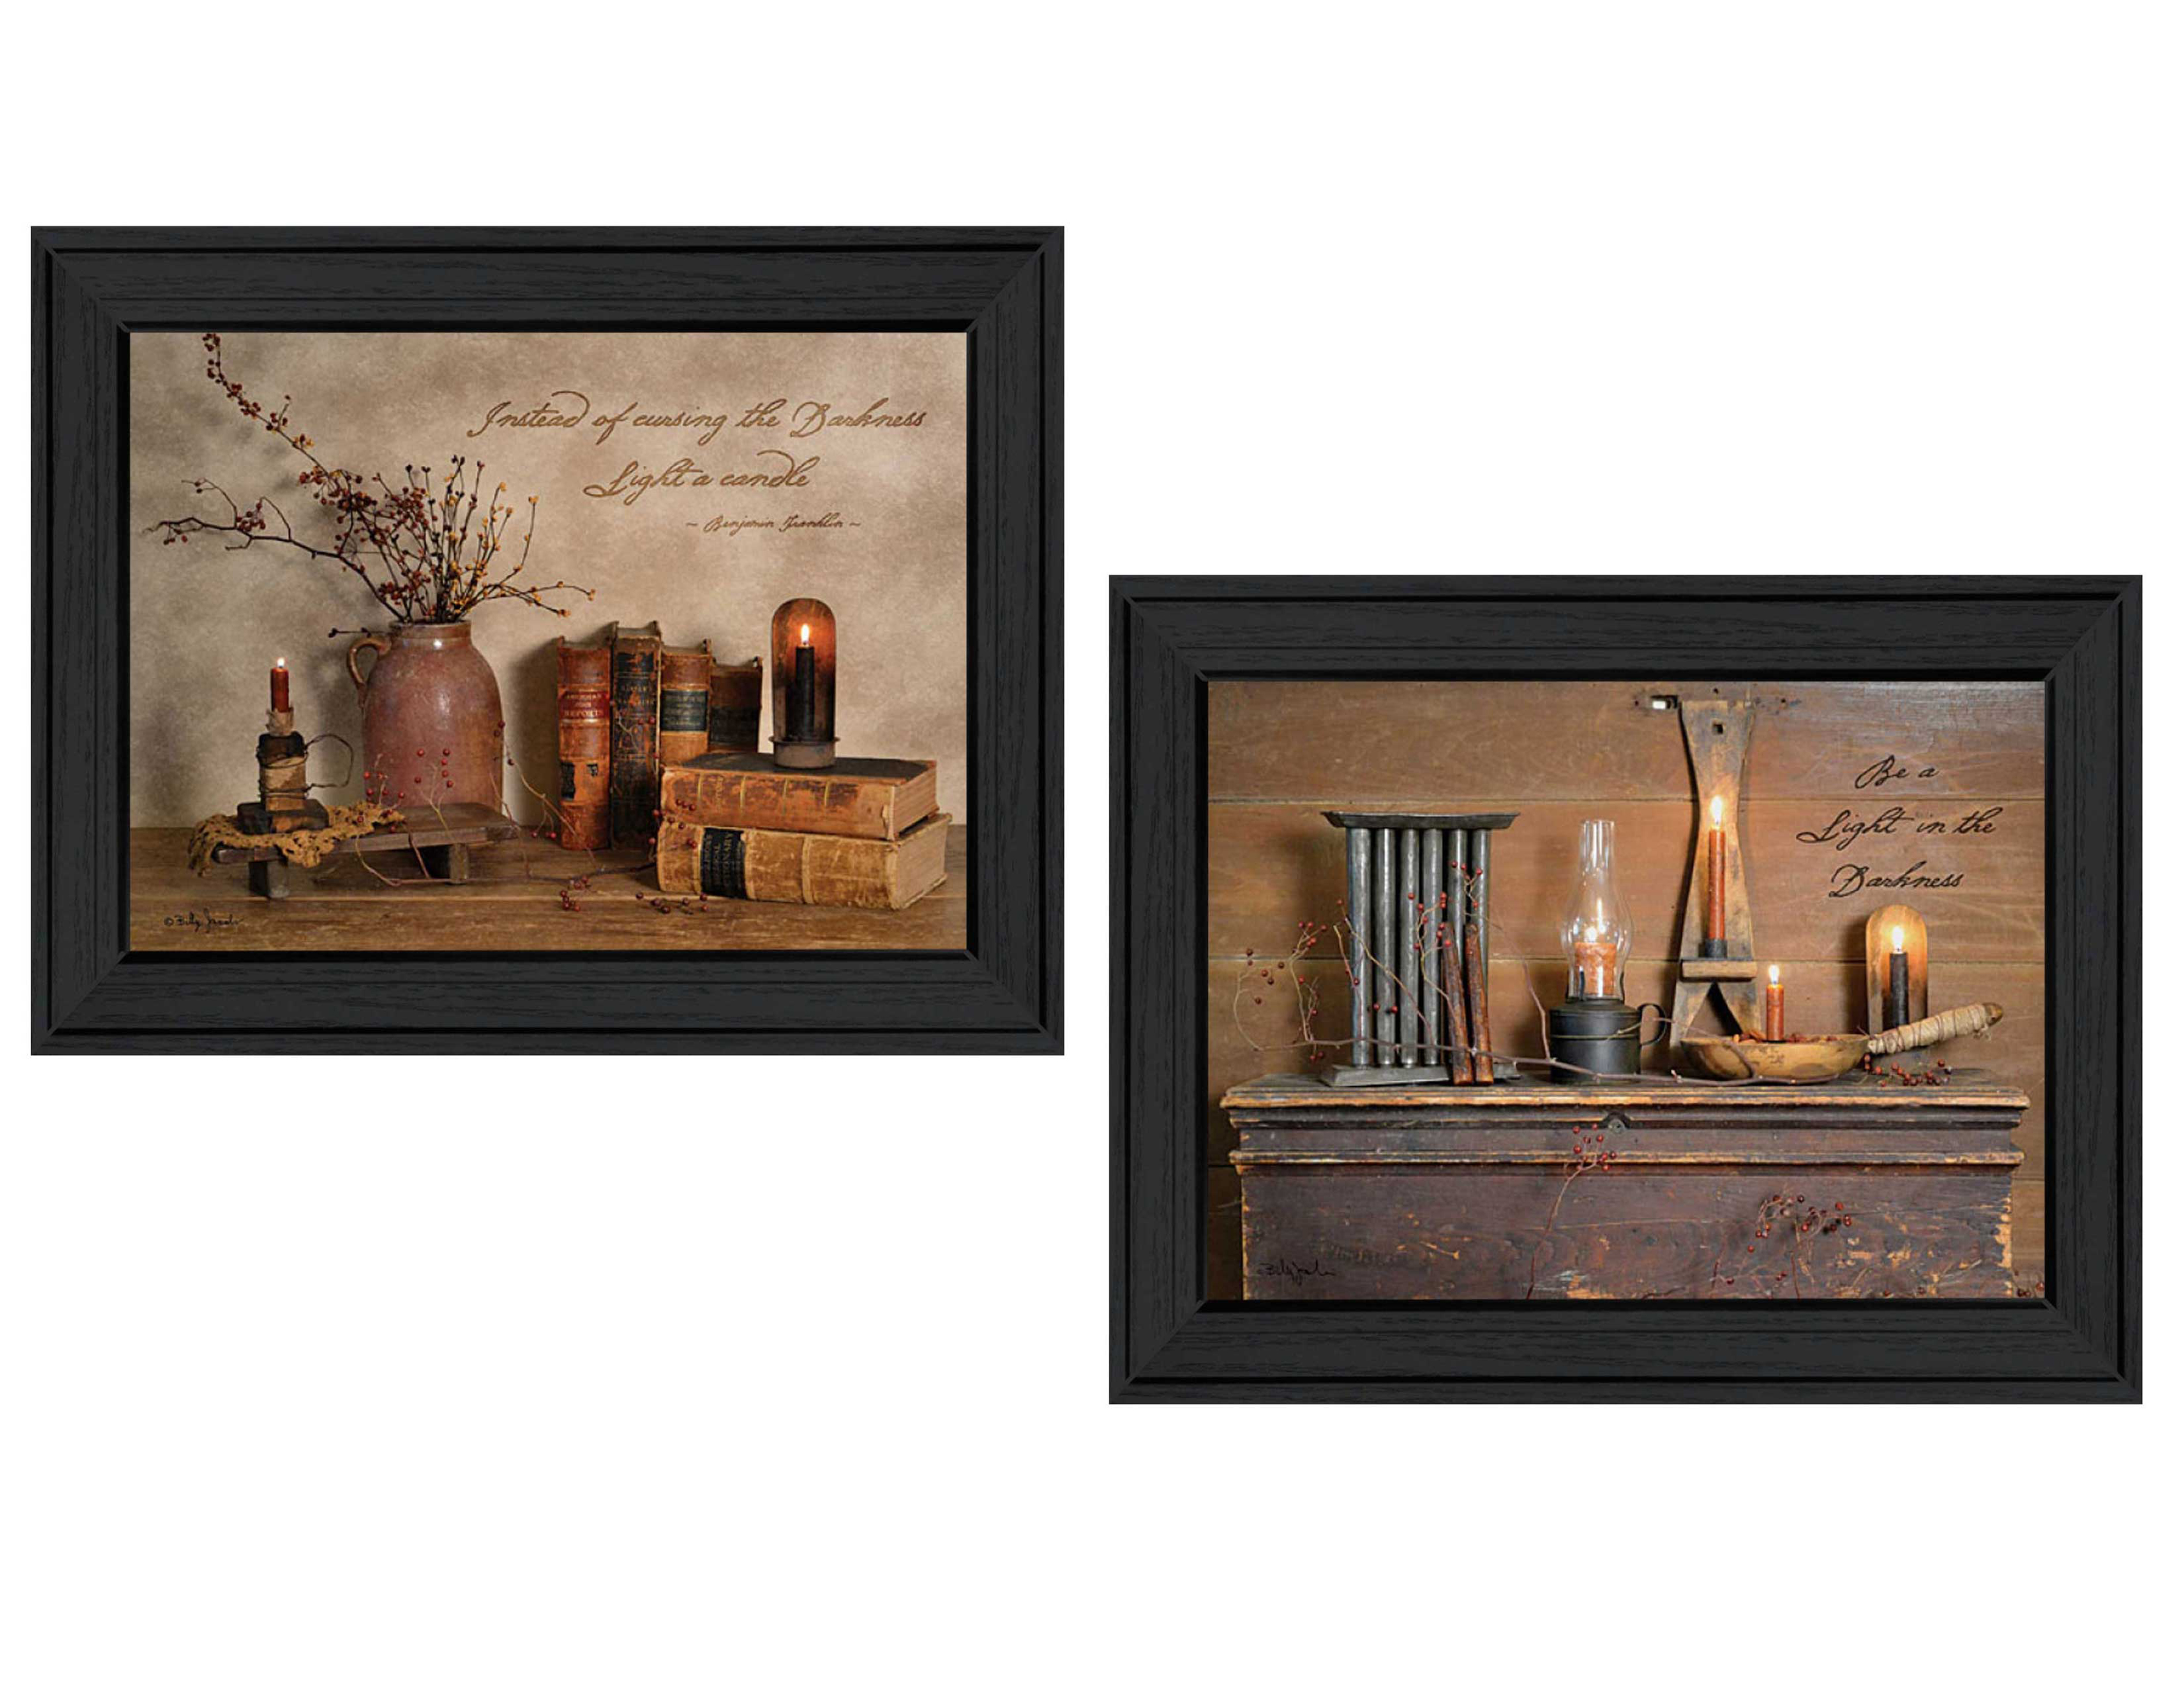 Trendy Decor 4U "Candles" Framed Wall Art, Modern Home Decor Framed Print for Living Room, Bedroom & Farmhouse Wall Decoration by Billy Jacobs